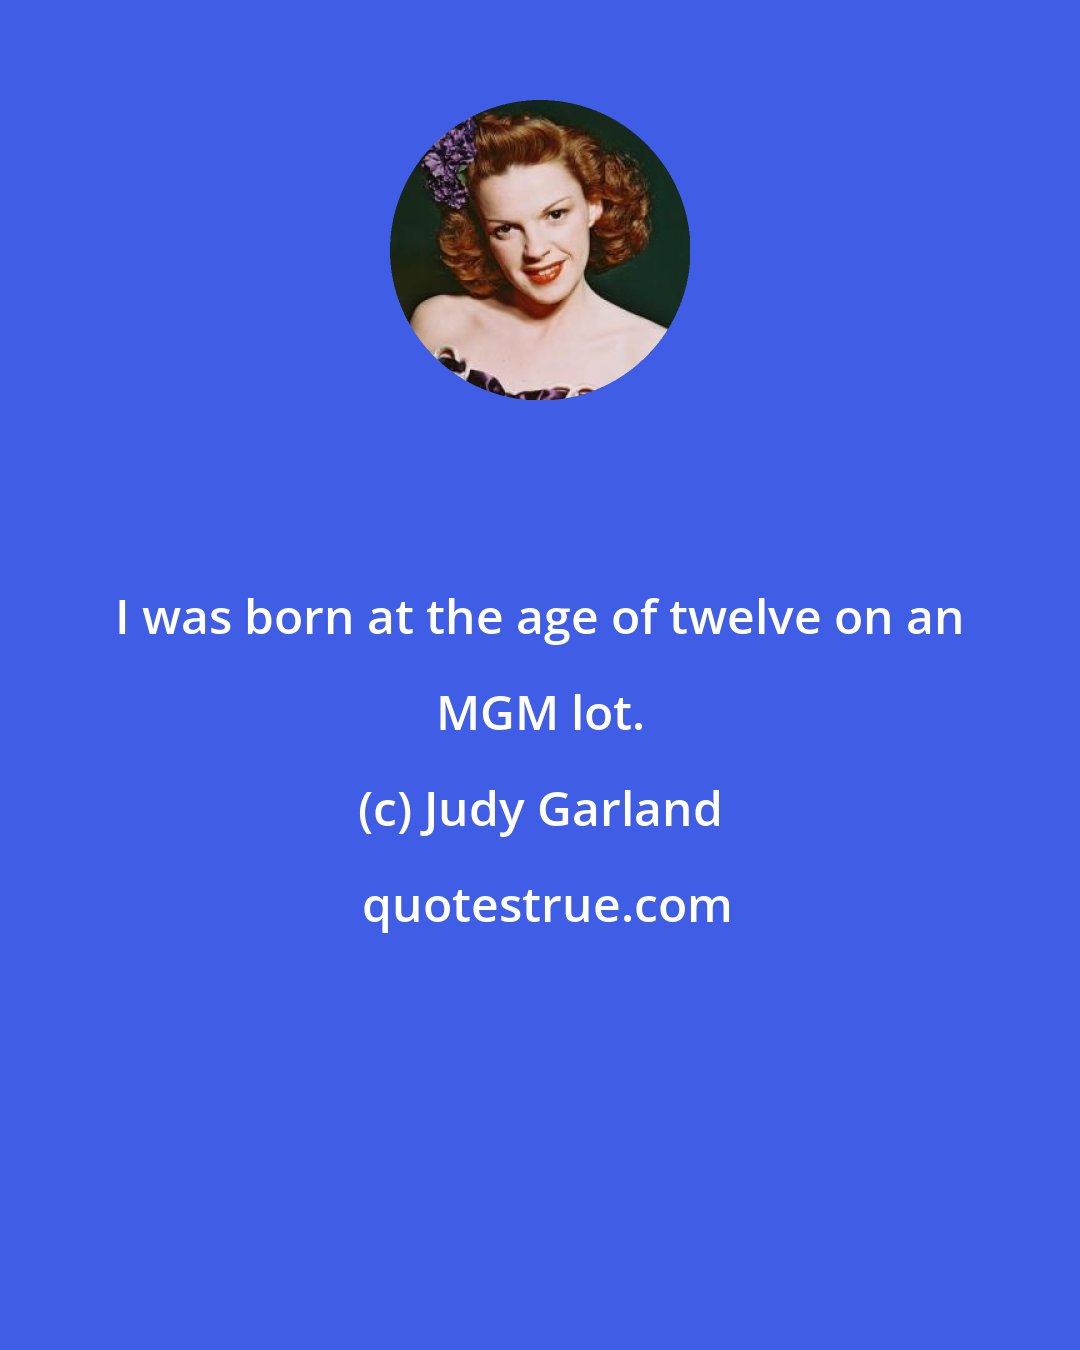 Judy Garland: I was born at the age of twelve on an MGM lot.